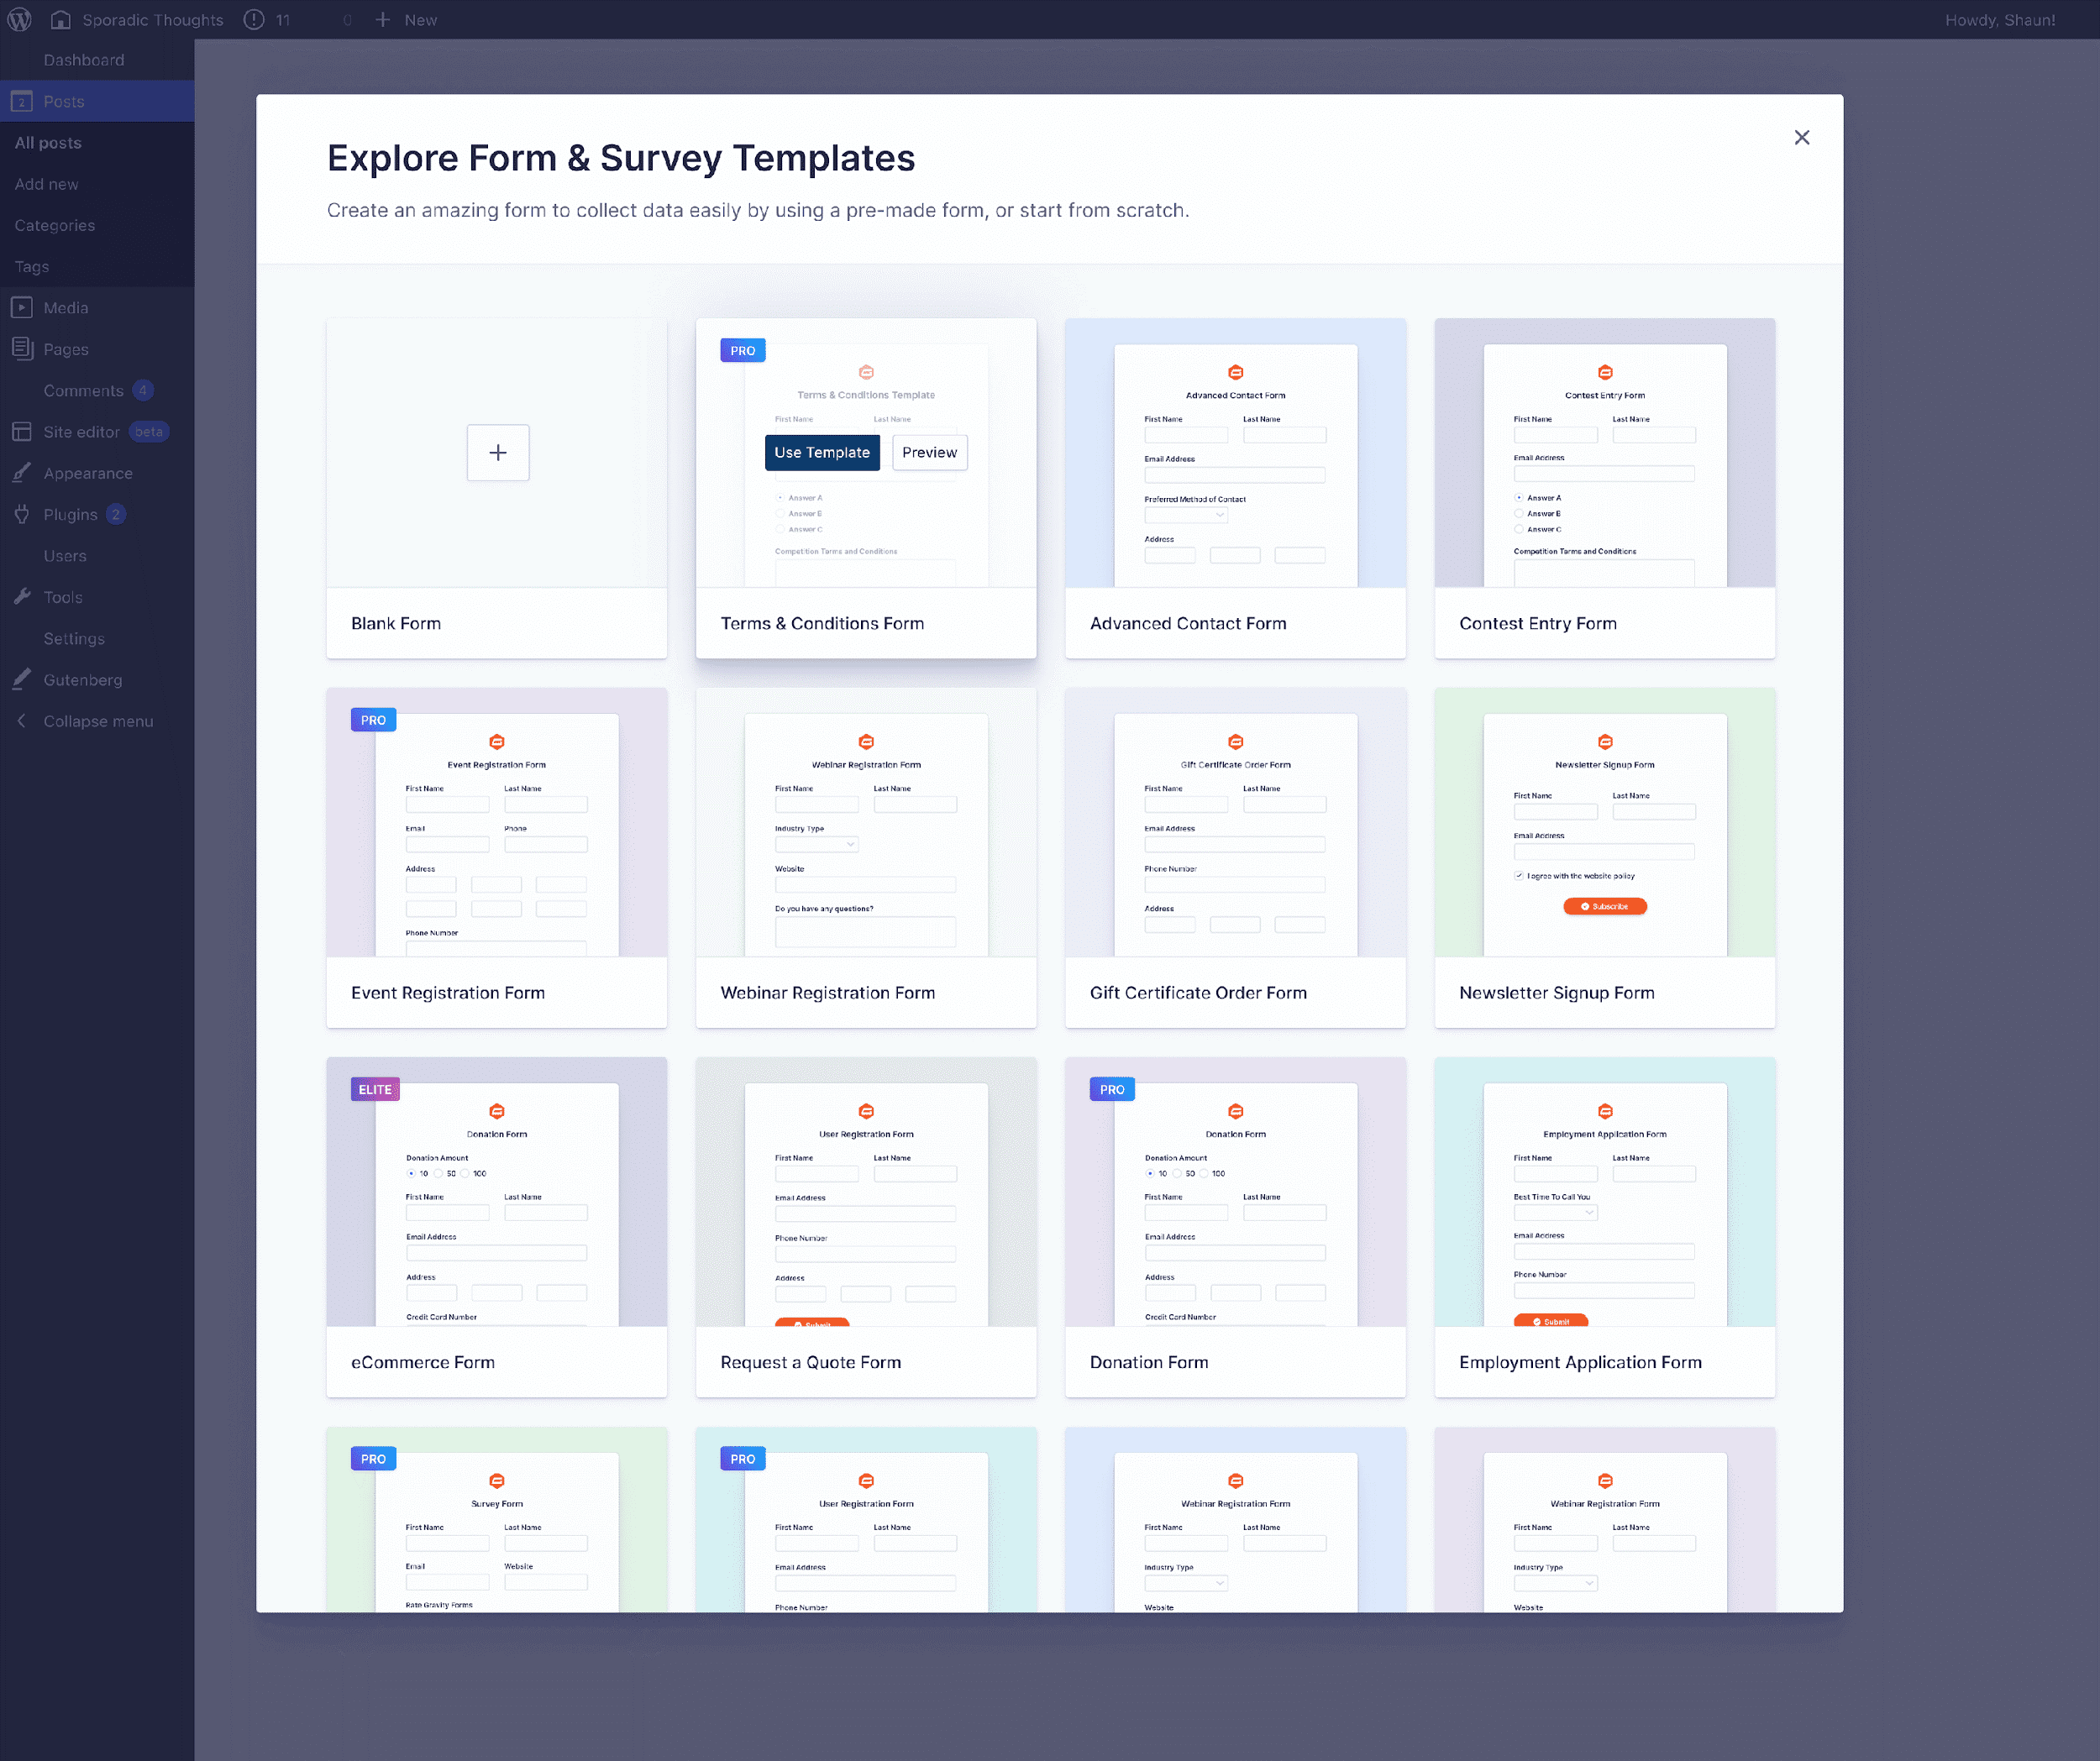 More Than Ever Form Templates